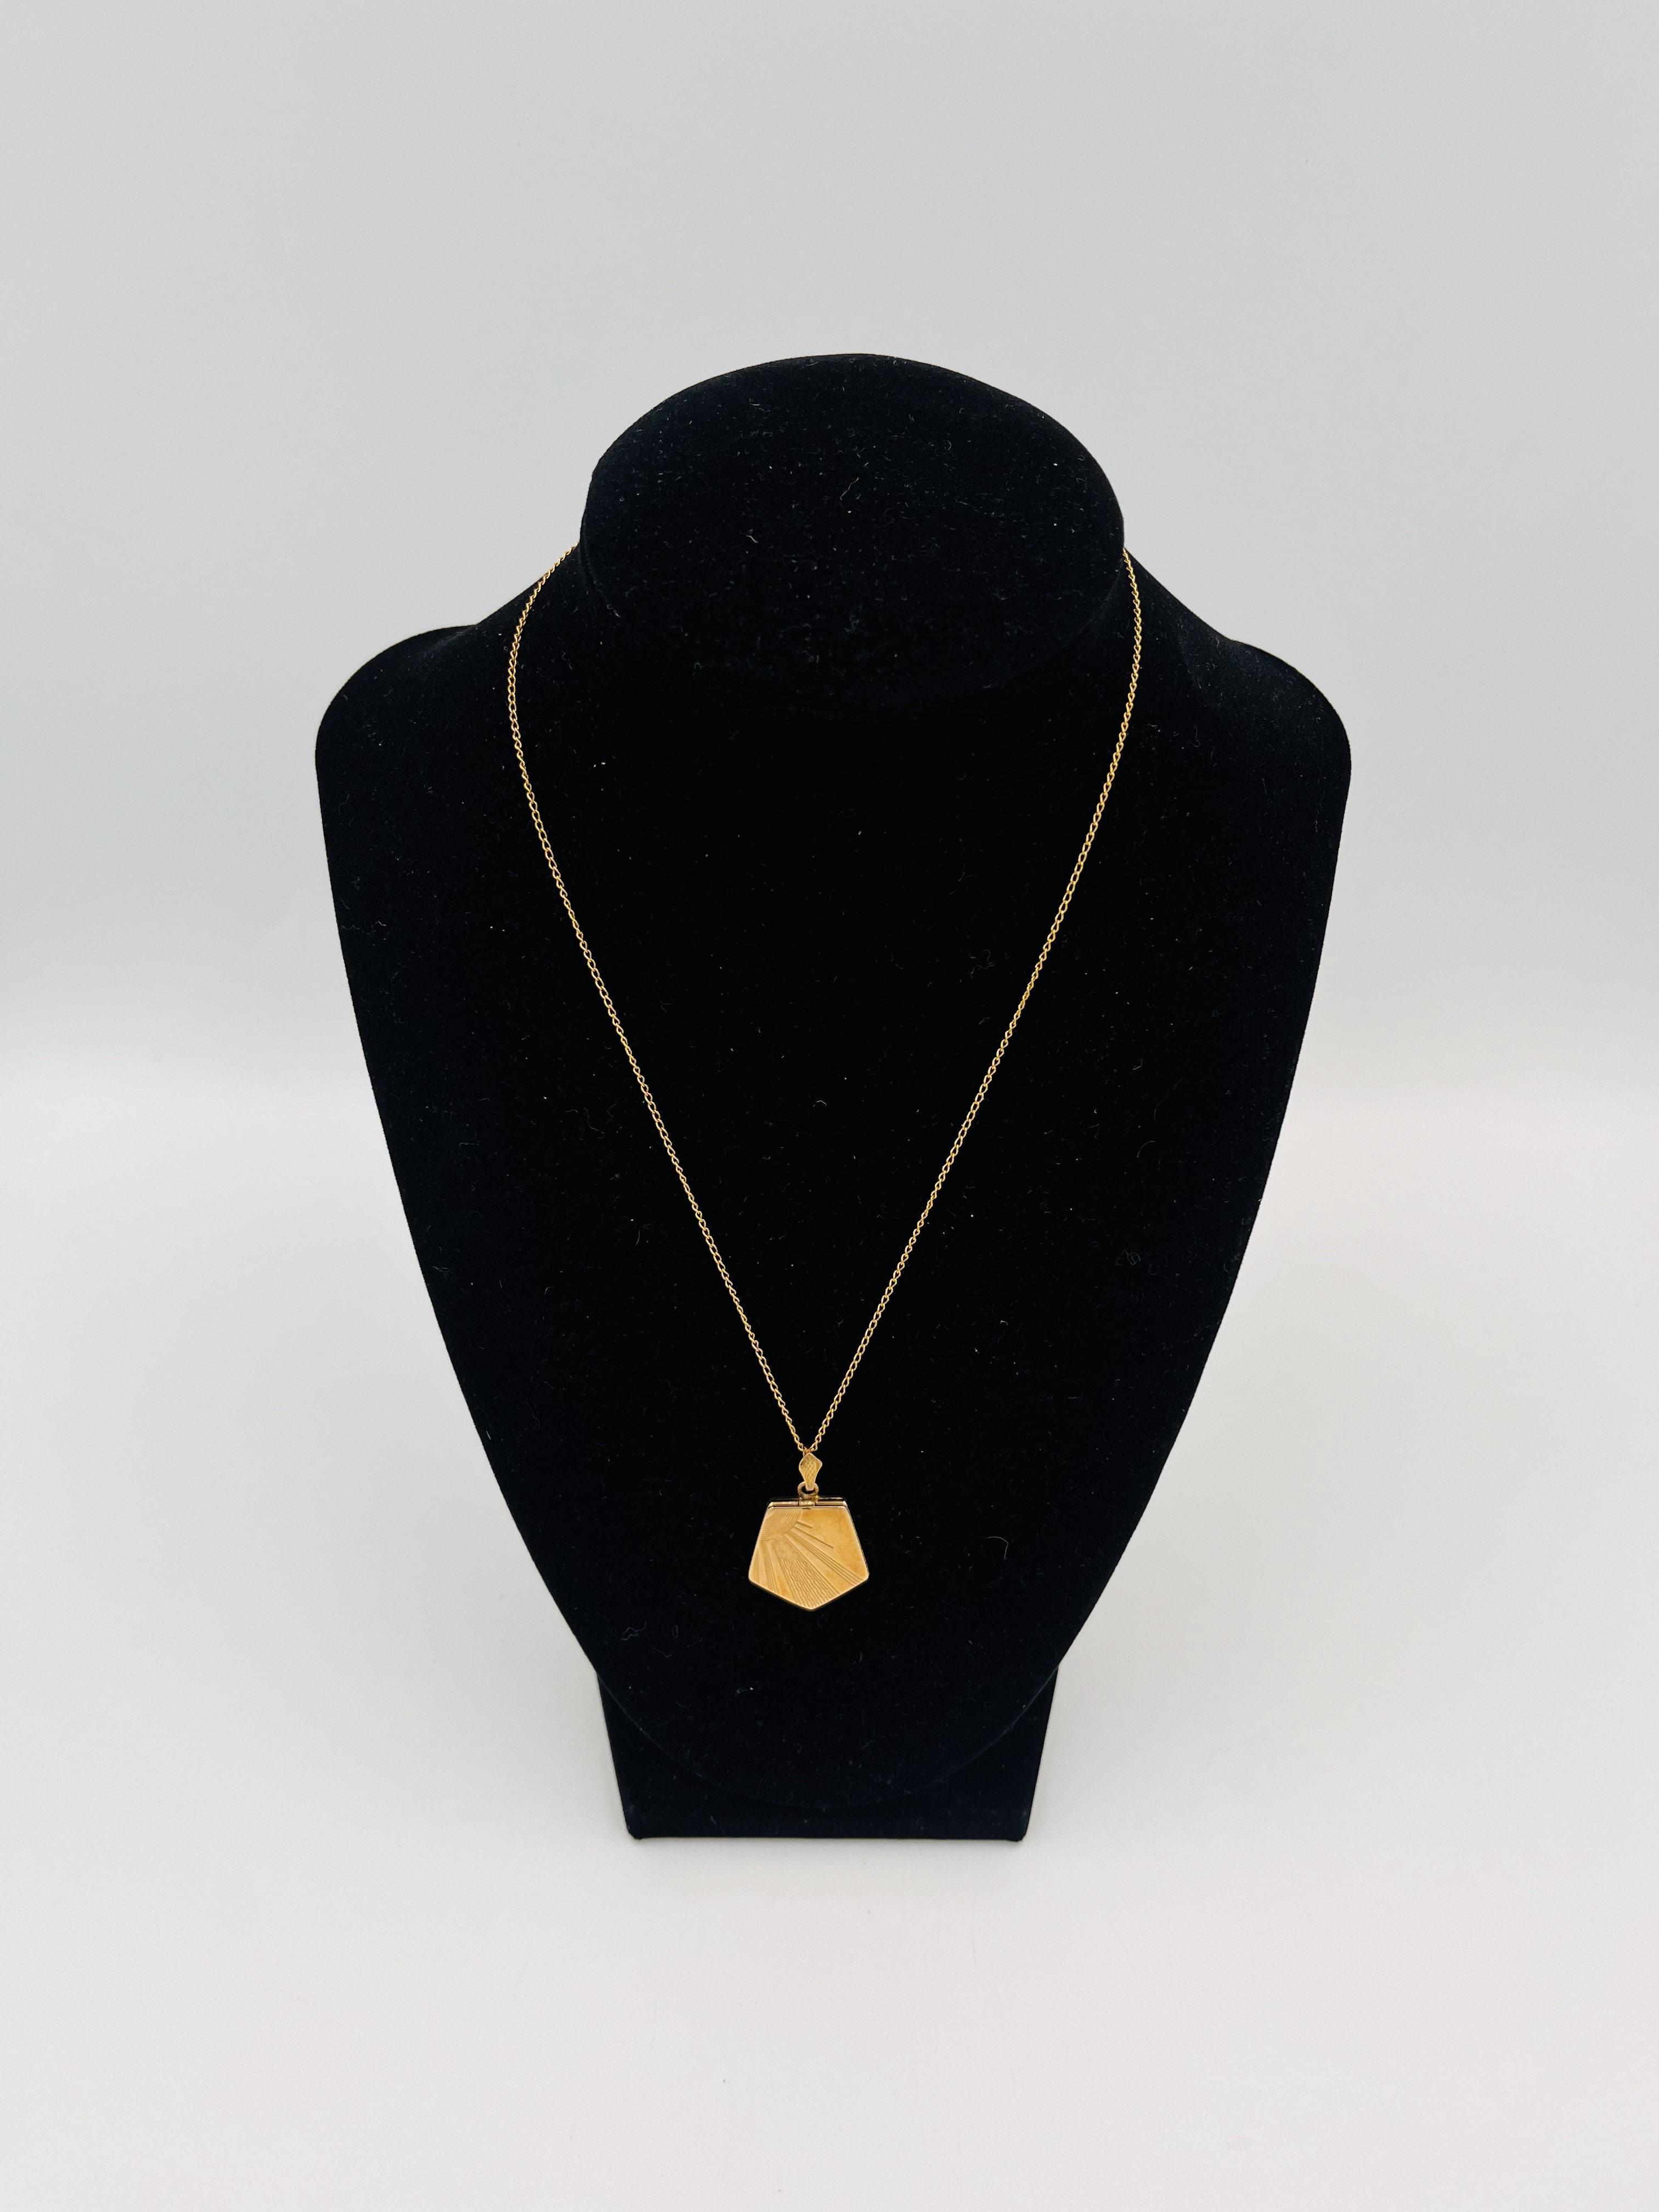 9ct gold locket on 9ct gold chain - Image 2 of 6